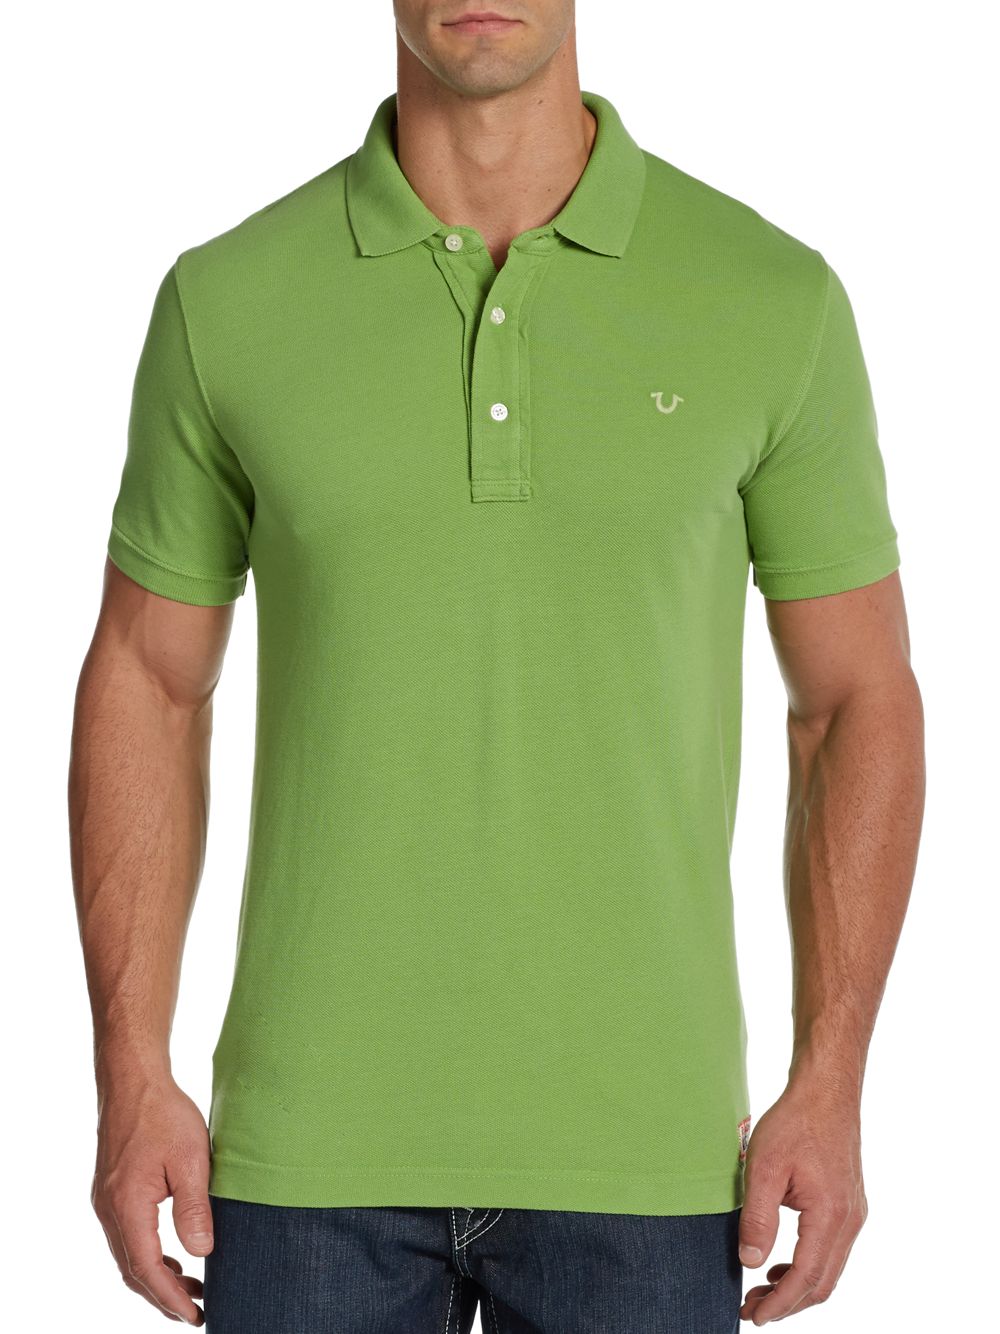 Lyst - True Religion Embroidered Logo Cotton Polo Shirt in Green for Men